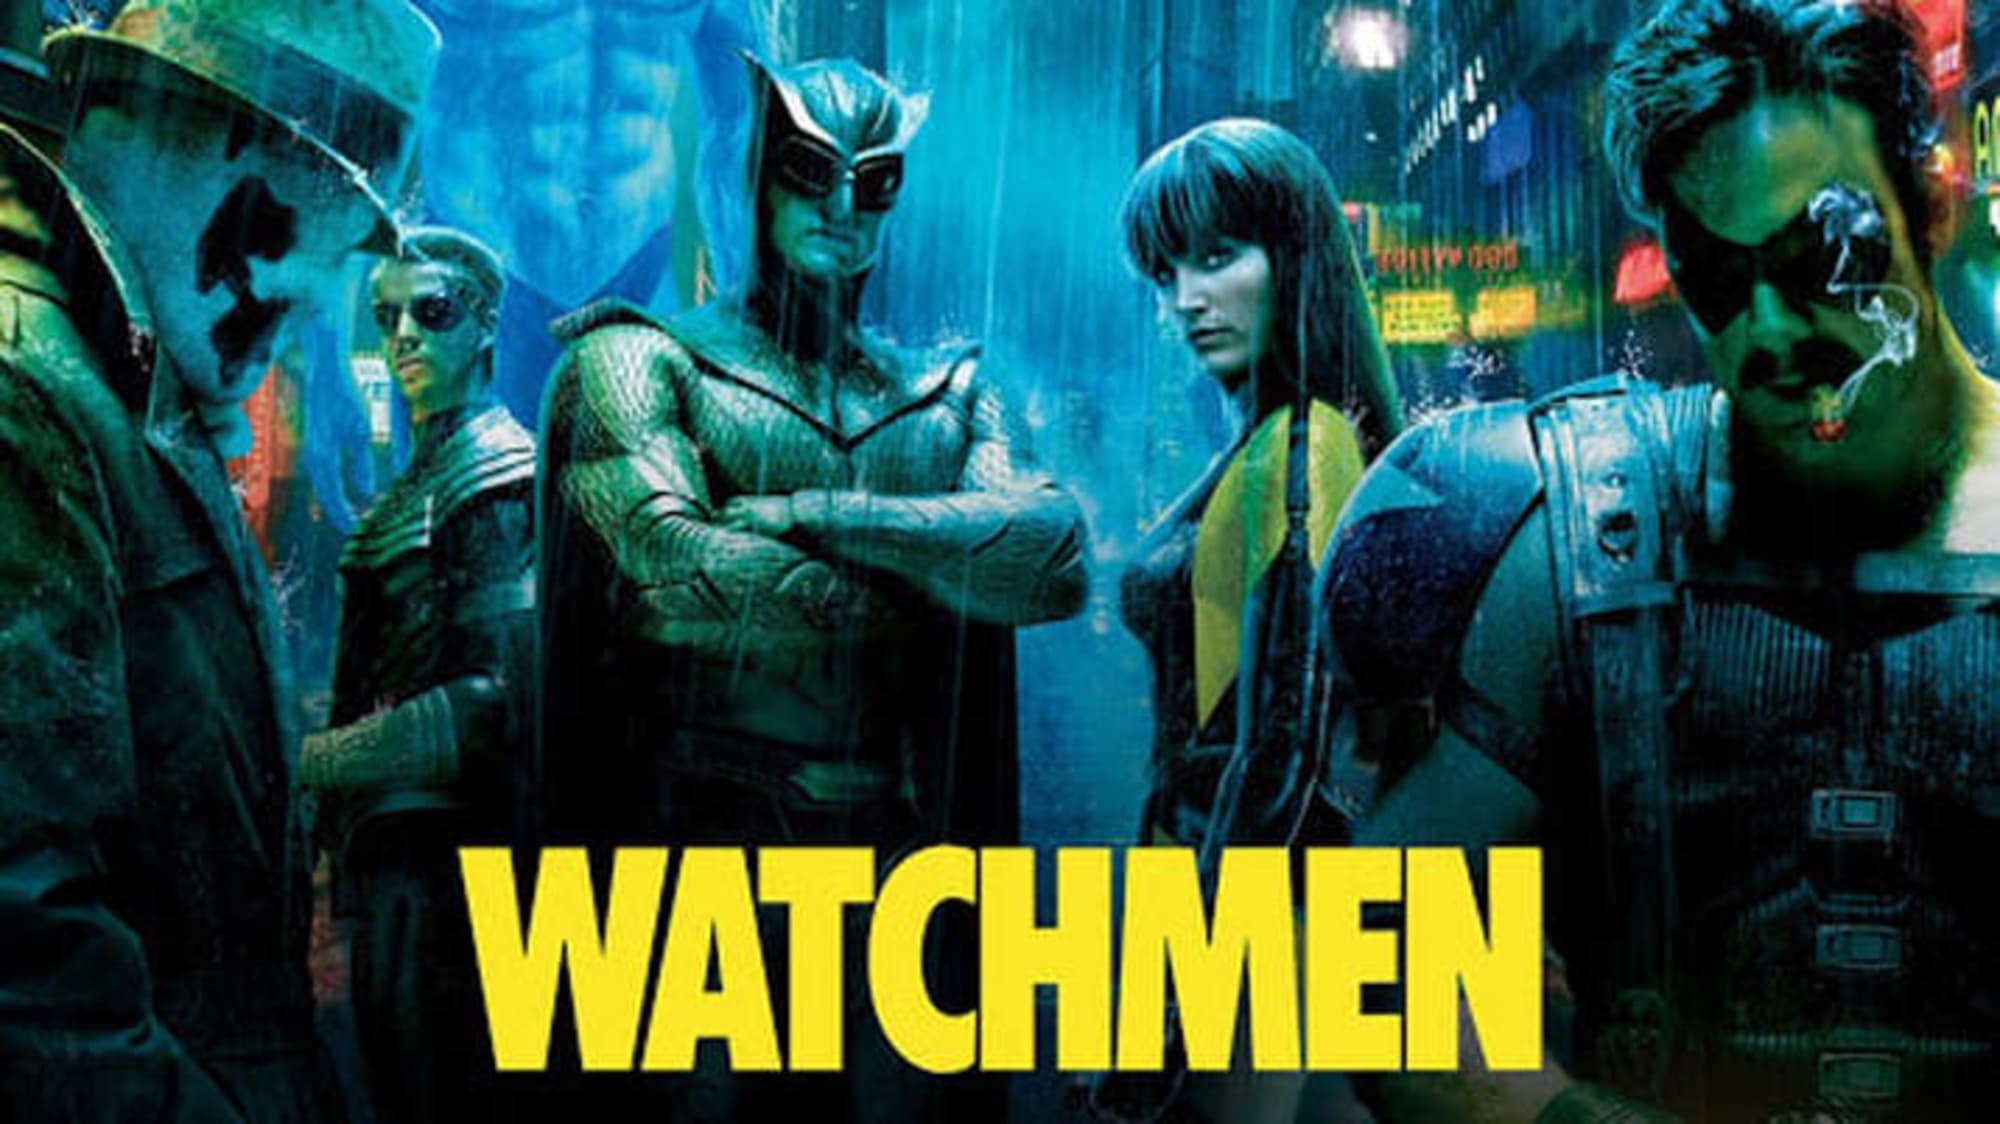 The Watchman - Movie